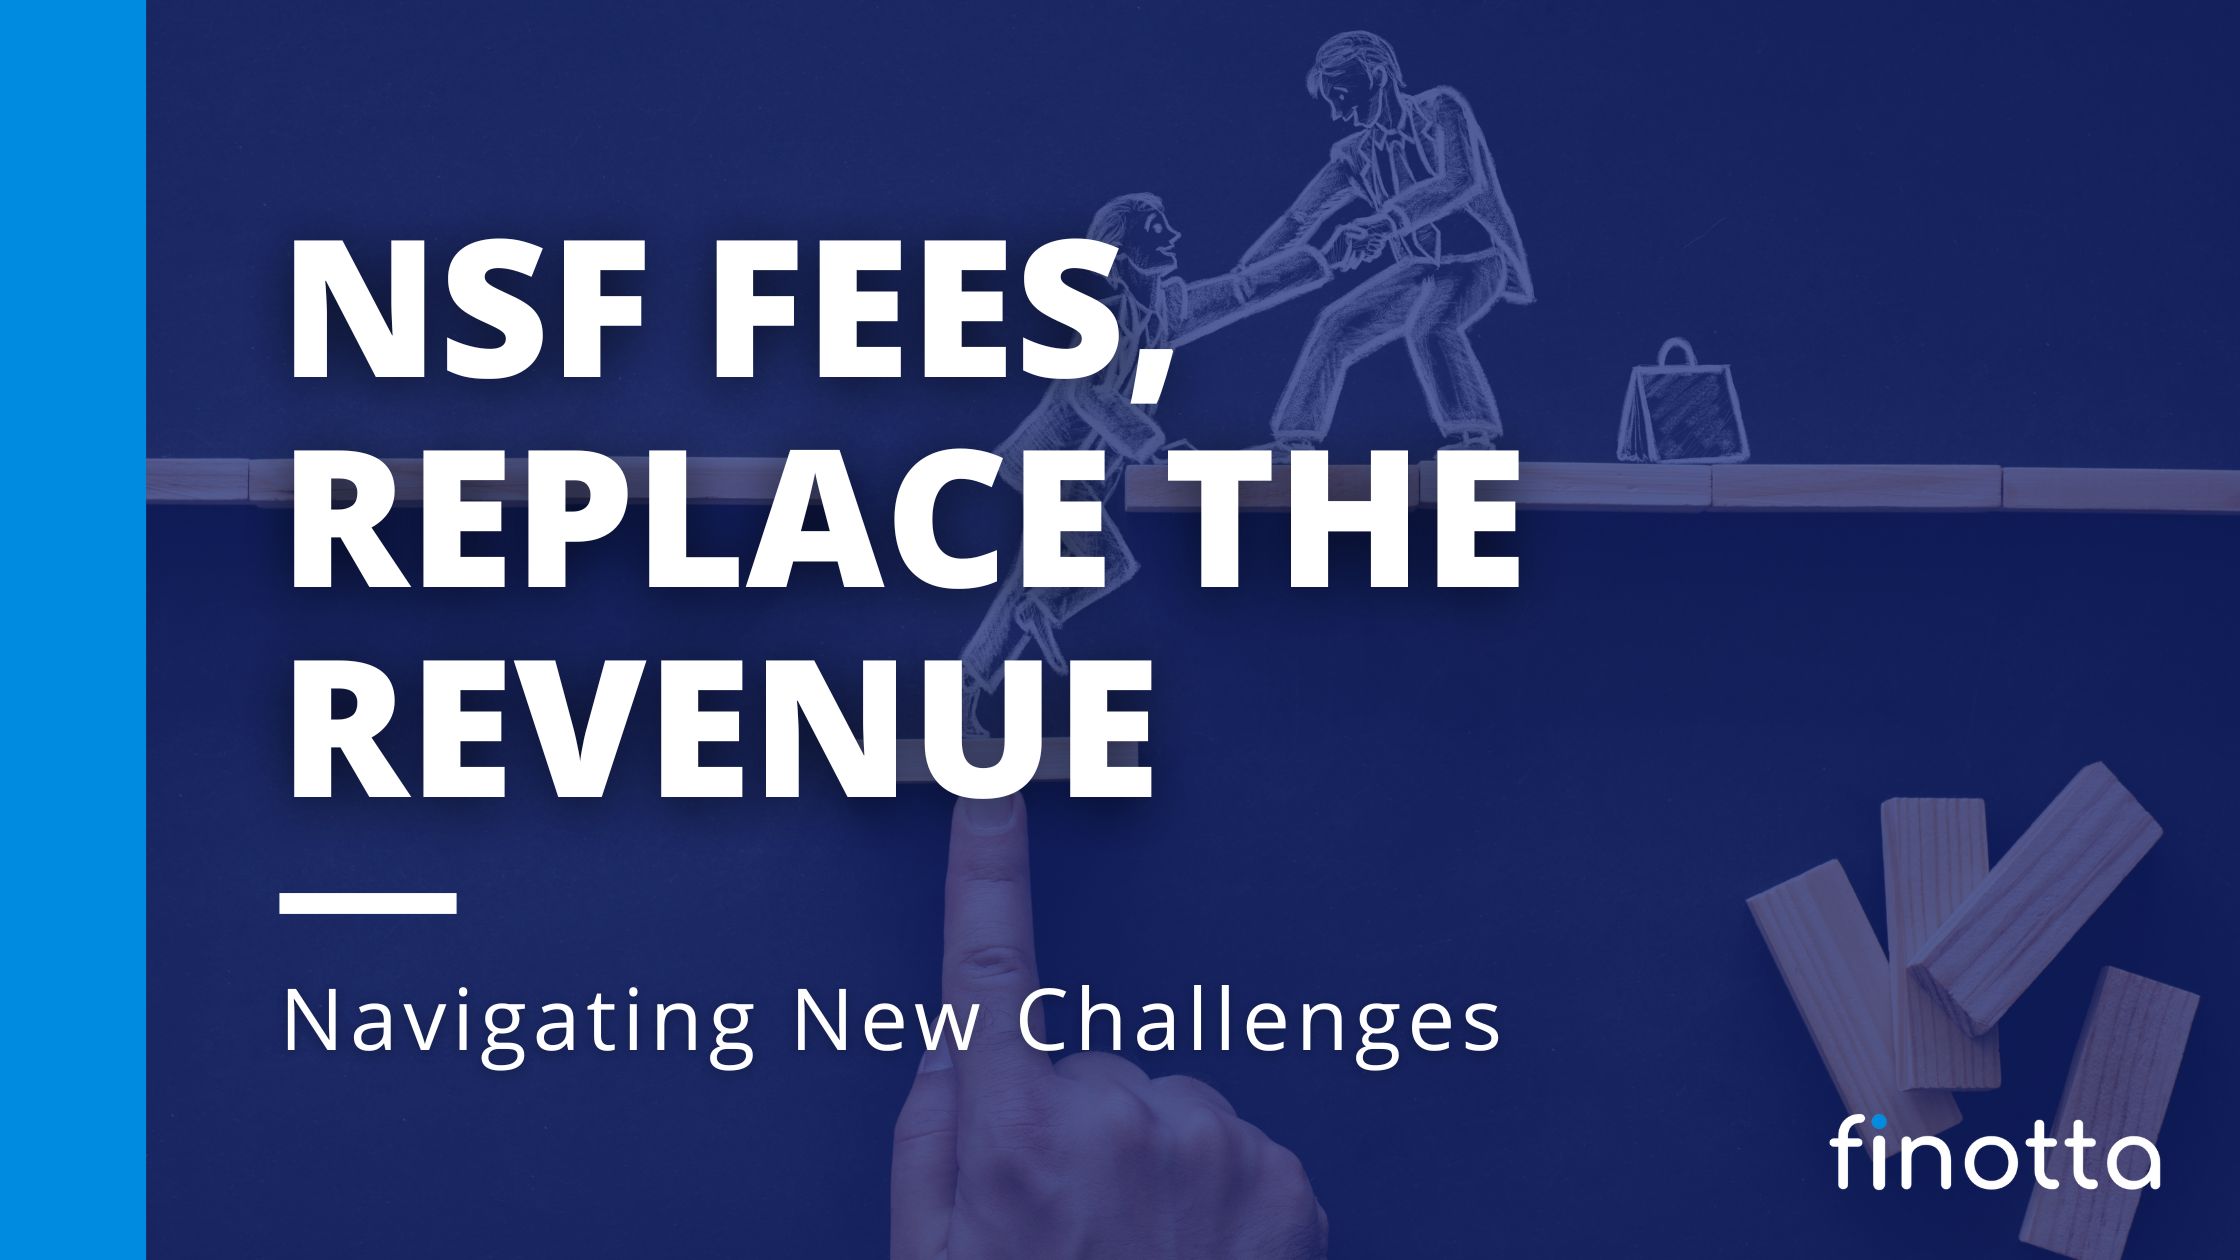 NSF Fees, Replace the Revenue: Navigating New Challenges